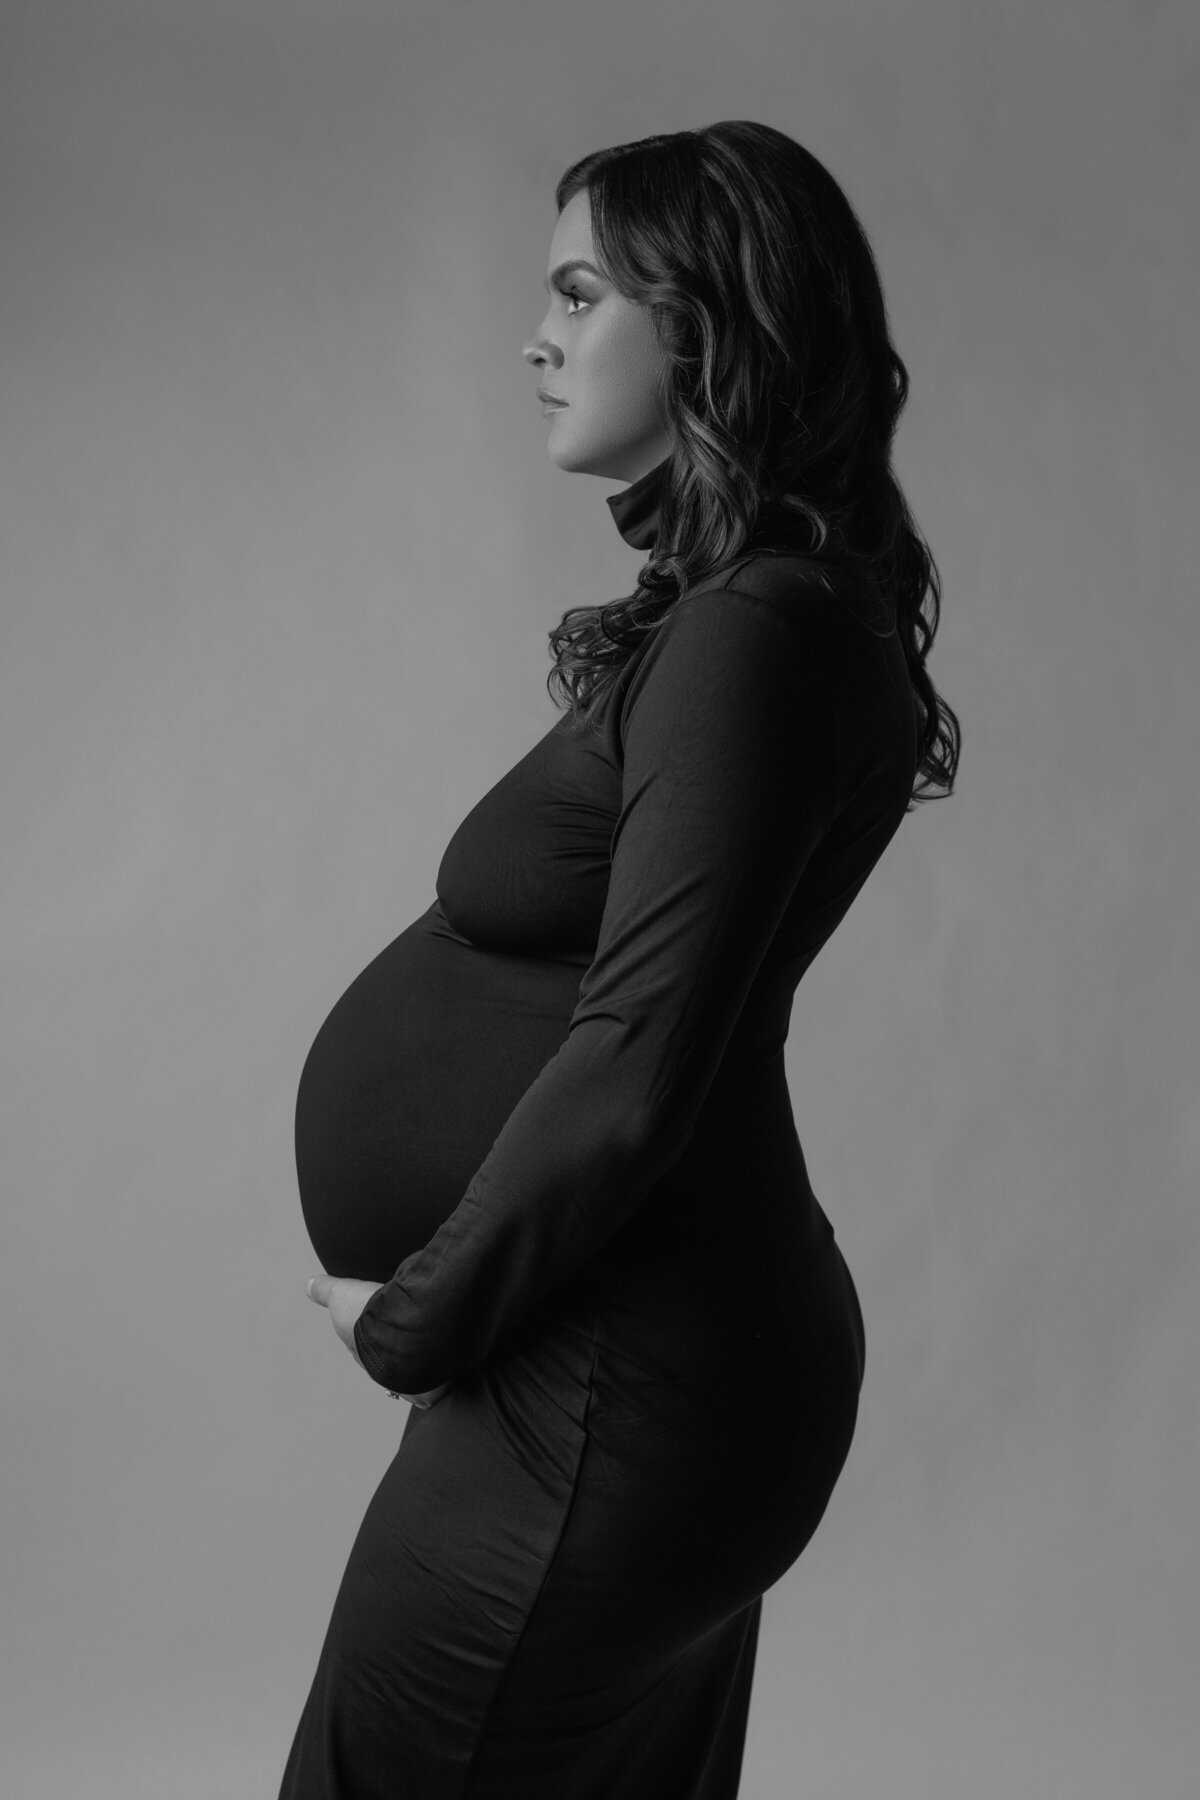 Artistic Maternity Photographer in Sanford NC